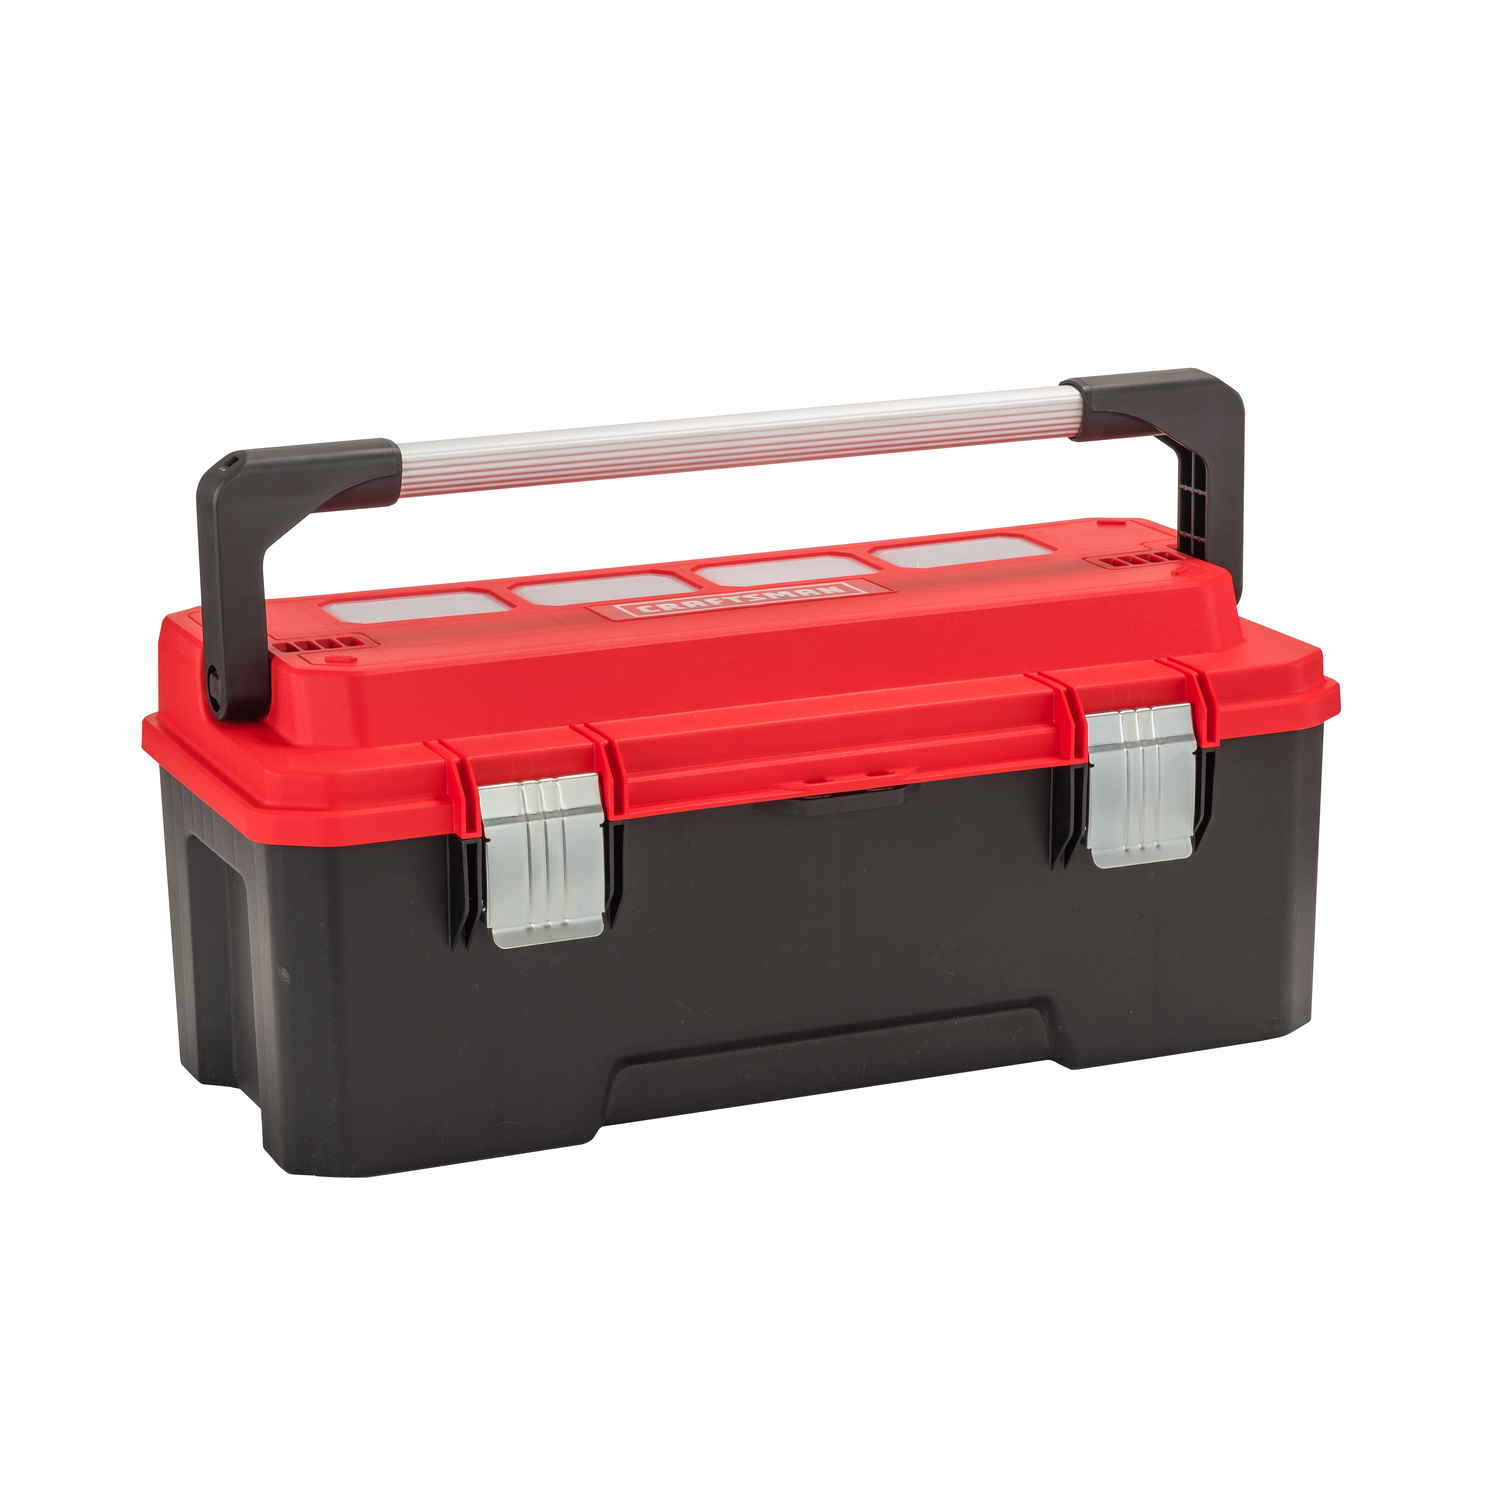 UPC 076174816617 product image for Craftsman 26 in. Plastic Professional Tool Box 11 in. W x 12 in. H Red 77 lb. | upcitemdb.com